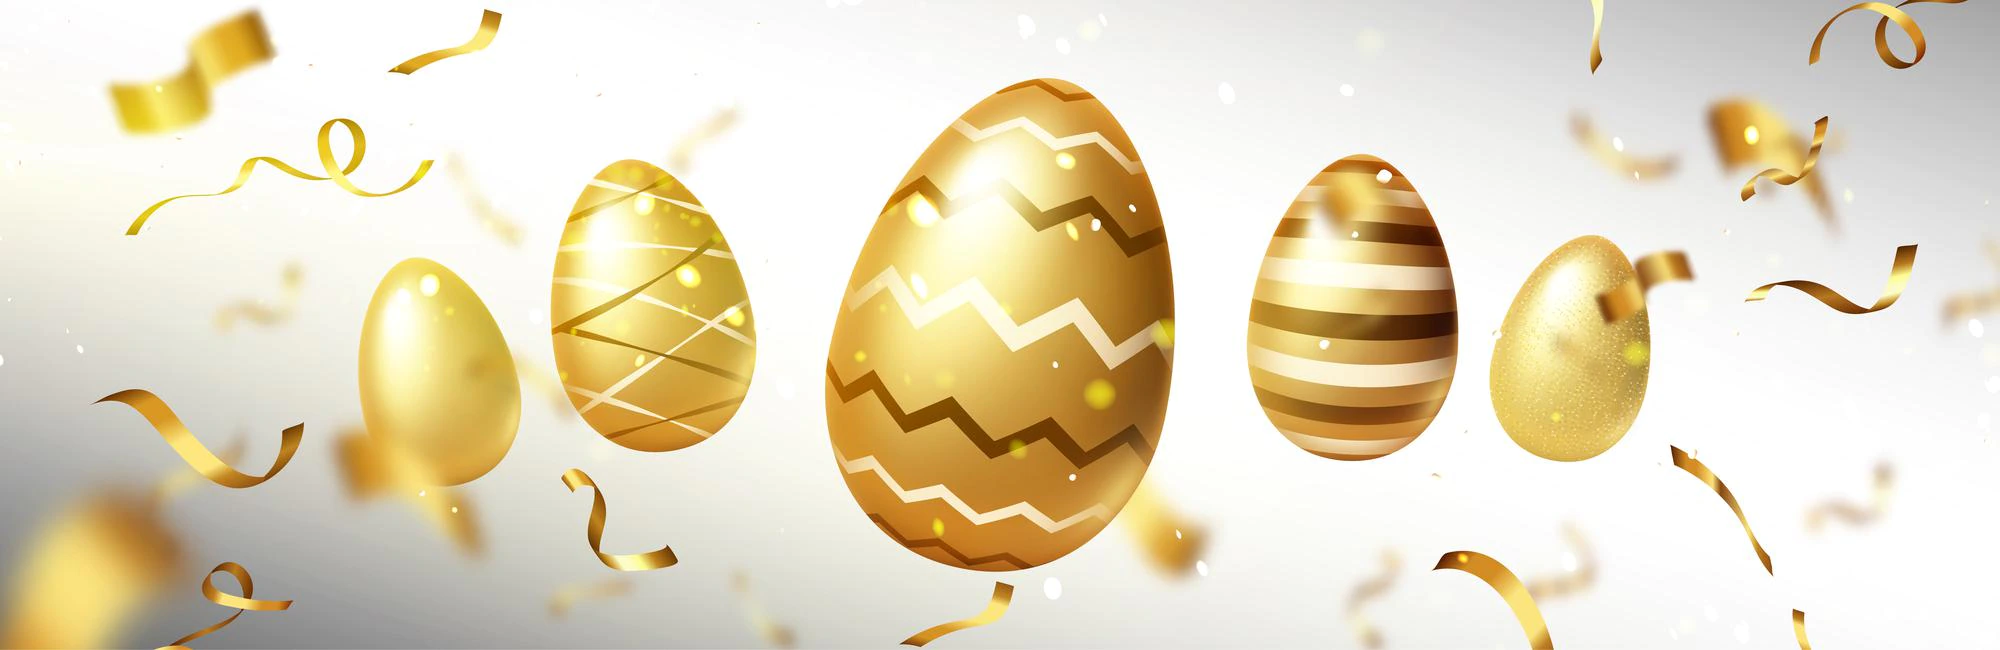 Happy Easter Poster With Golden Eggs With Patterns Spiral Ribbons Vector Banner Spring Holiday Celebration With Realistic Illustration 3d Luxury Gold Eggs Confetti 107791 9925